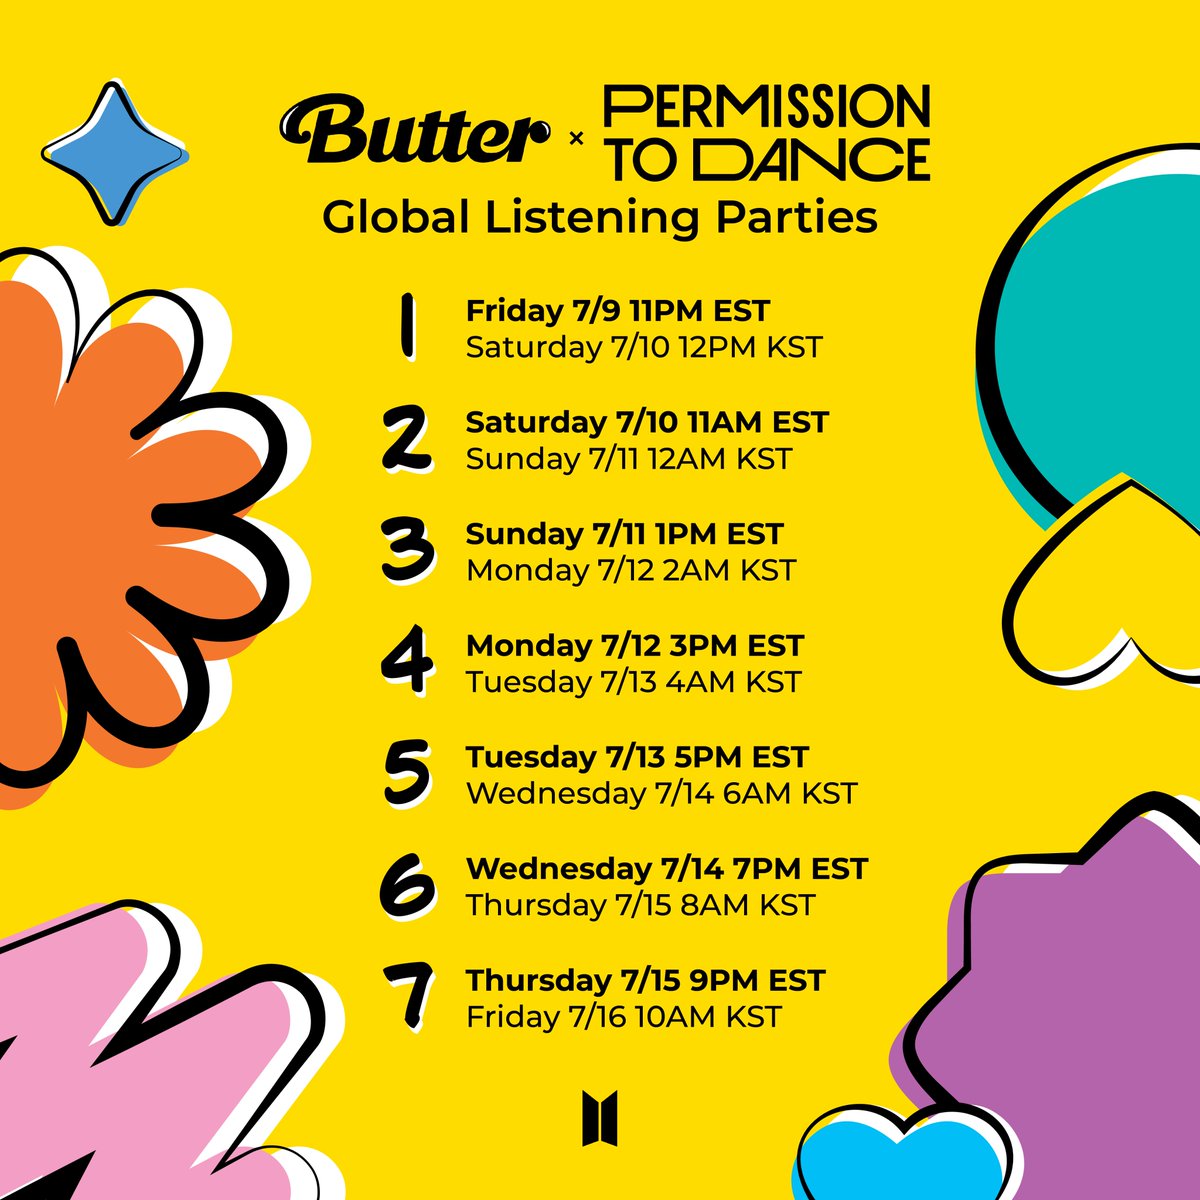 Come and join our listening parties with BTS' favorite tracks! (*Spotify or Apple Music log-in required) 7일 동안의 리스닝 파티에 #BTSARMY 여러분을 초대합니다! (*스포티파이 또는 애플뮤직 로그인 필요) 💌 listeningparty.bts-butter.com #BTS #방탄소년단 #BTS_Butter #PermissiontoDance